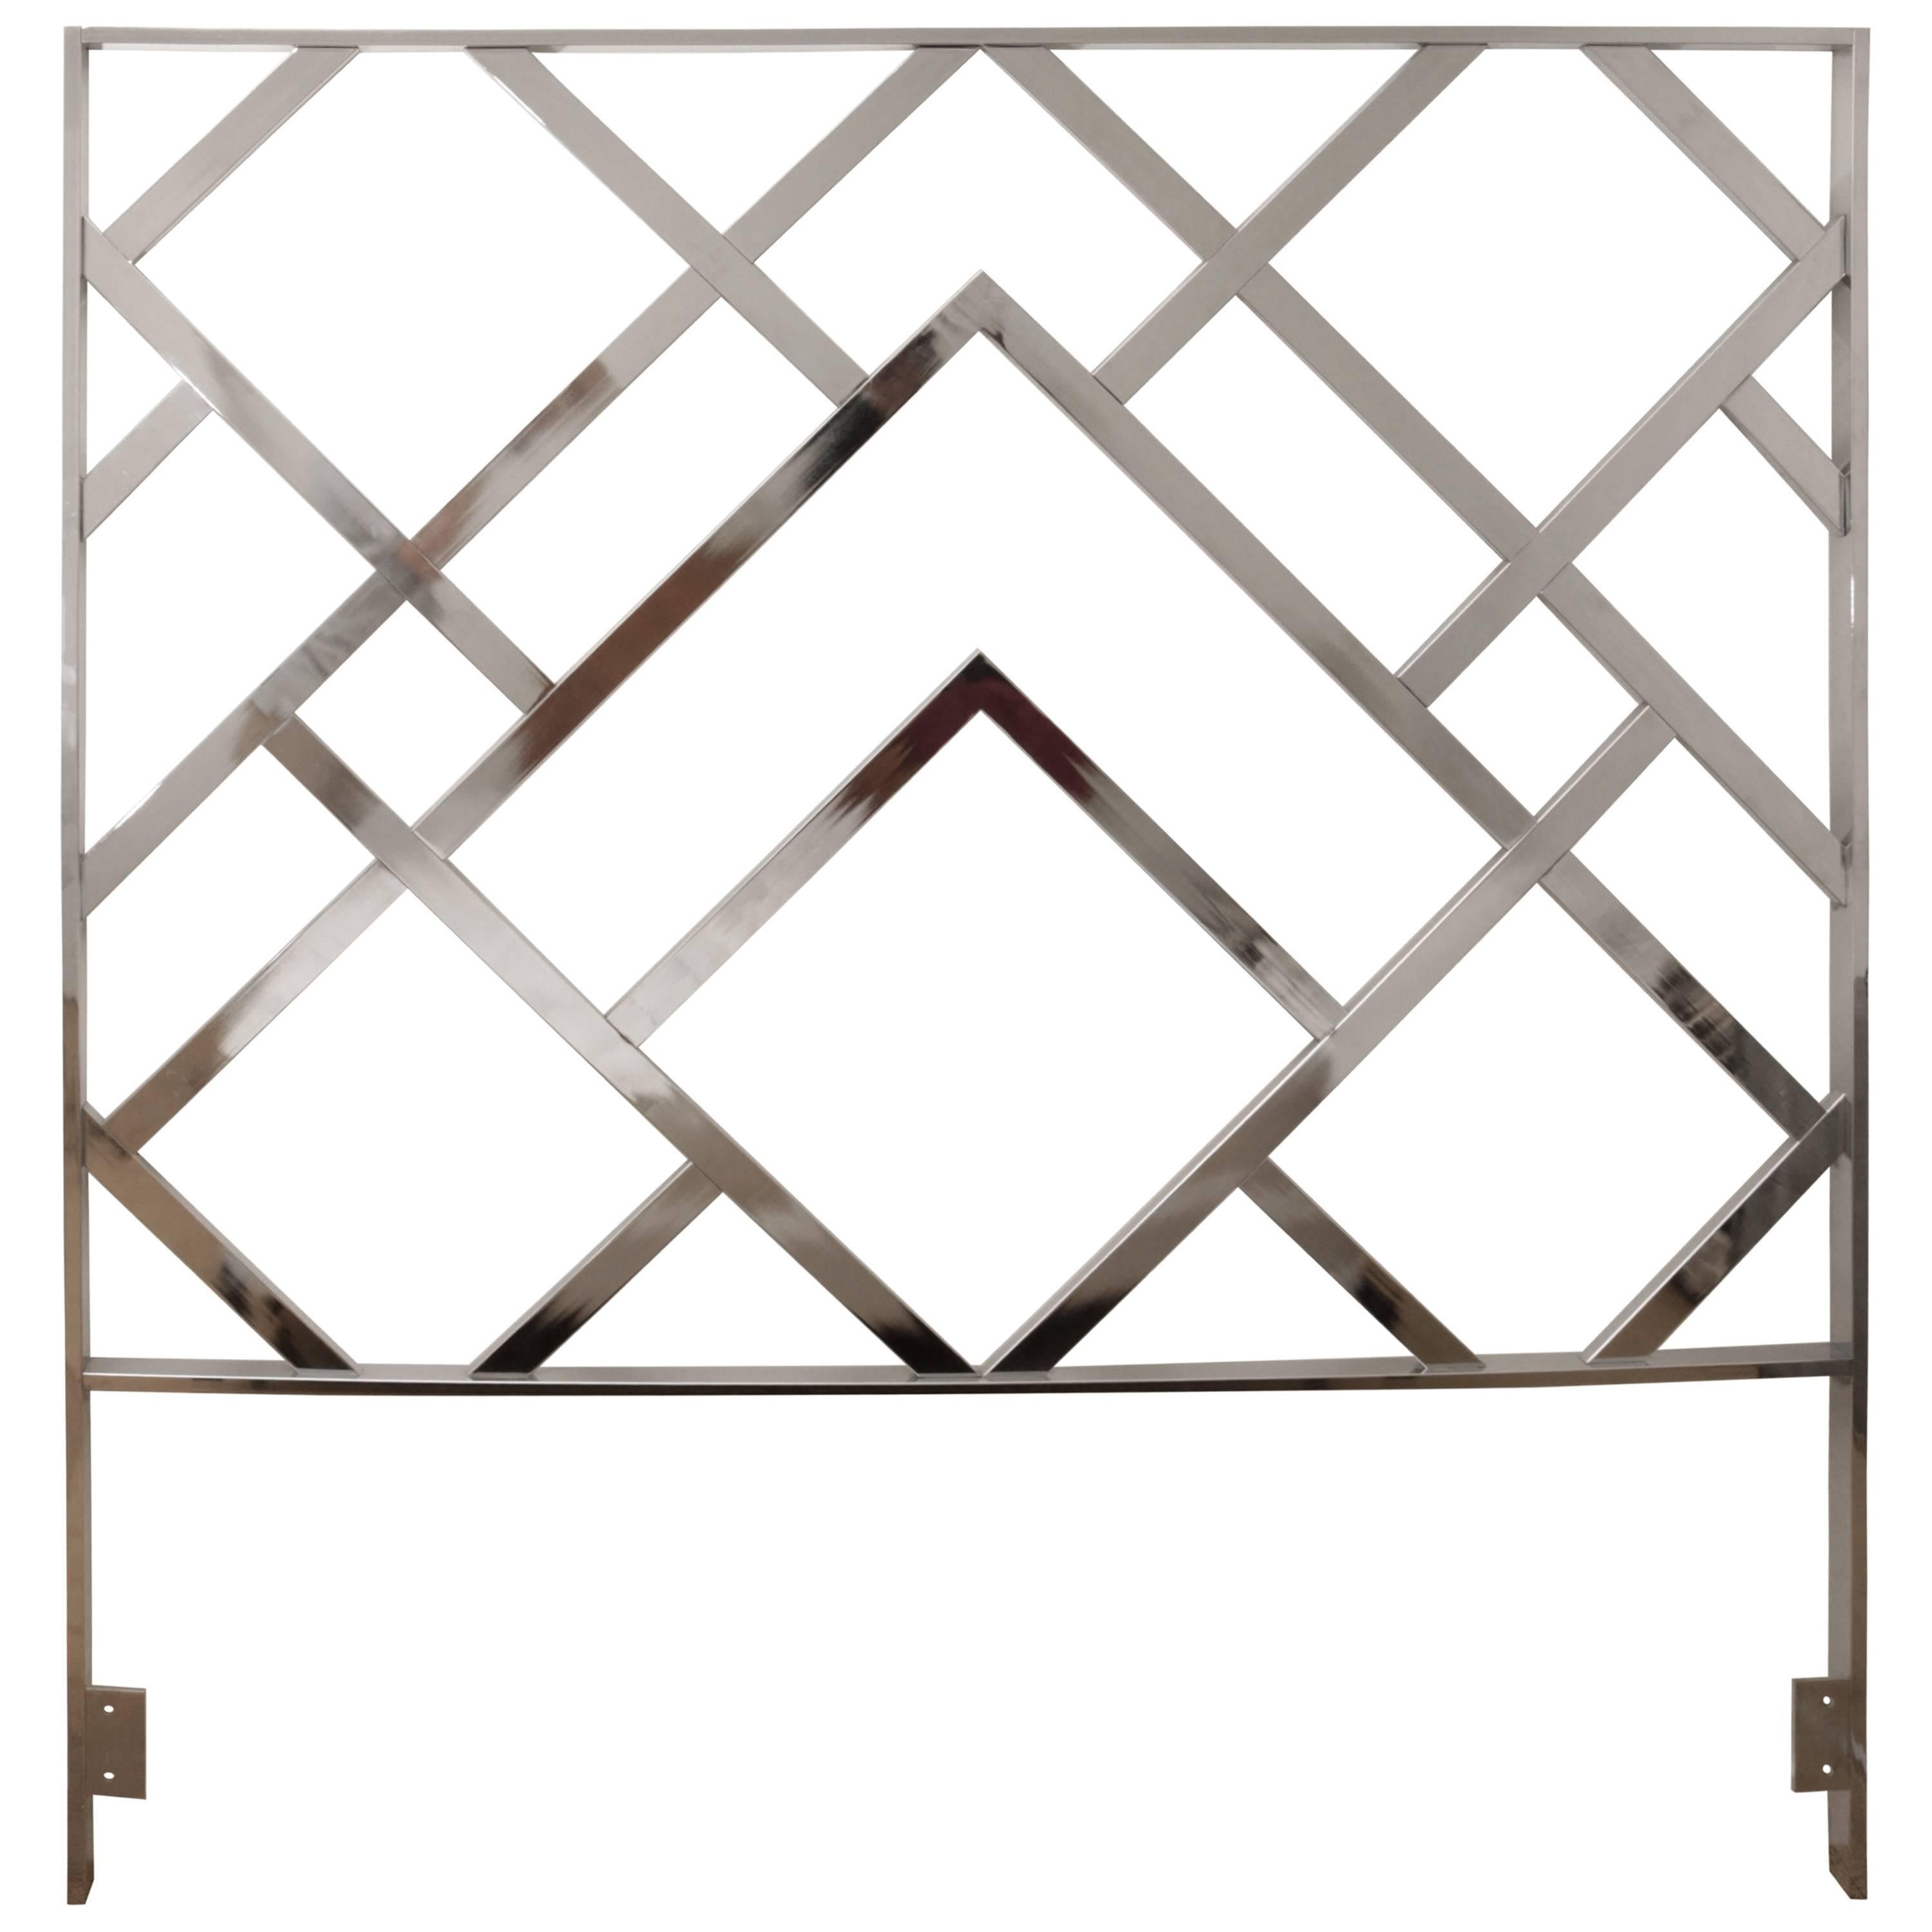 Milo Baughman for D.I.A., Queen-Size Polished Chrome Headboard